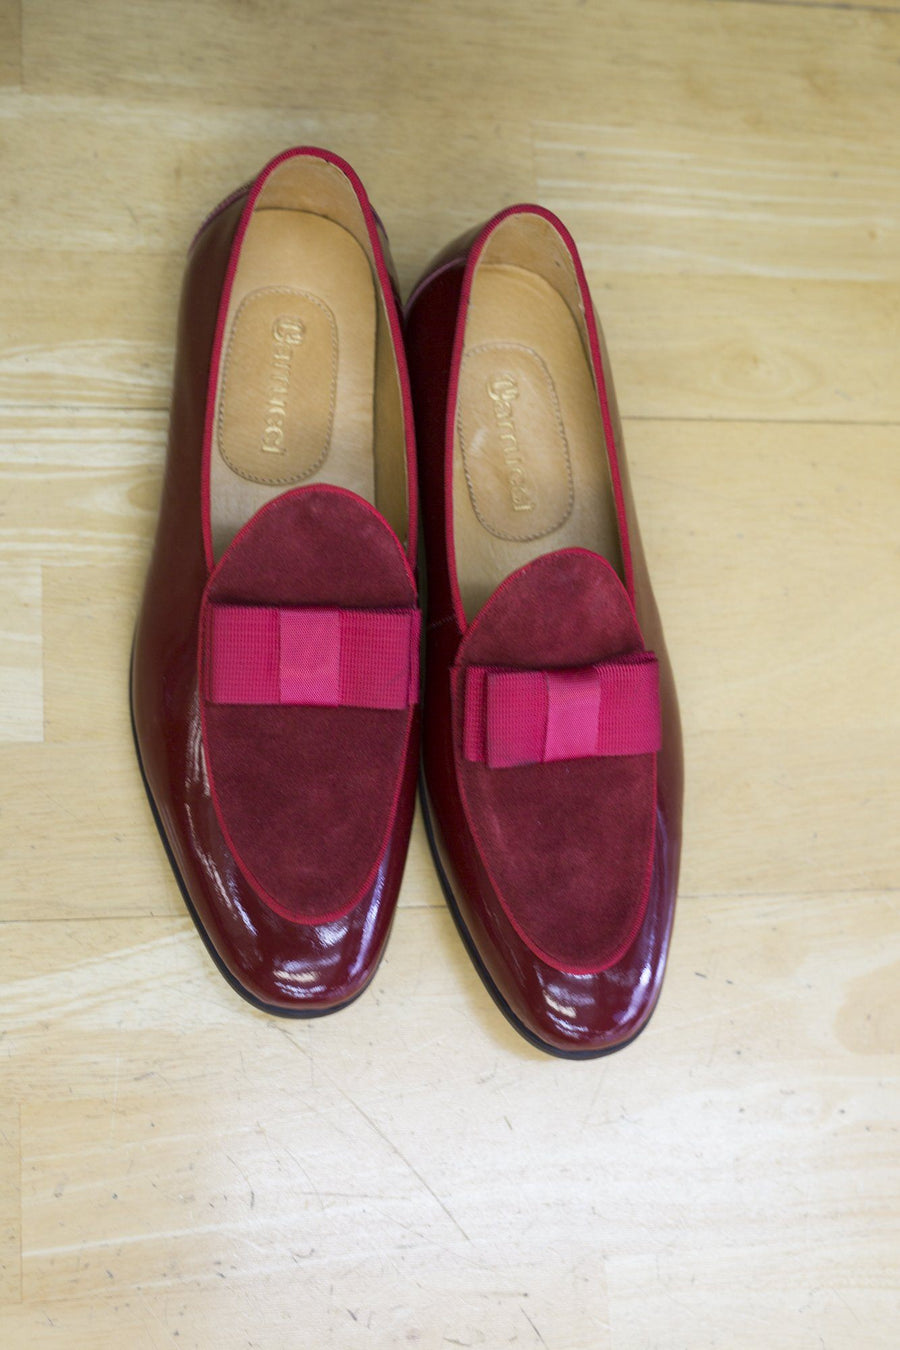 Patent Leather & Suede Slip-On Loafer Red